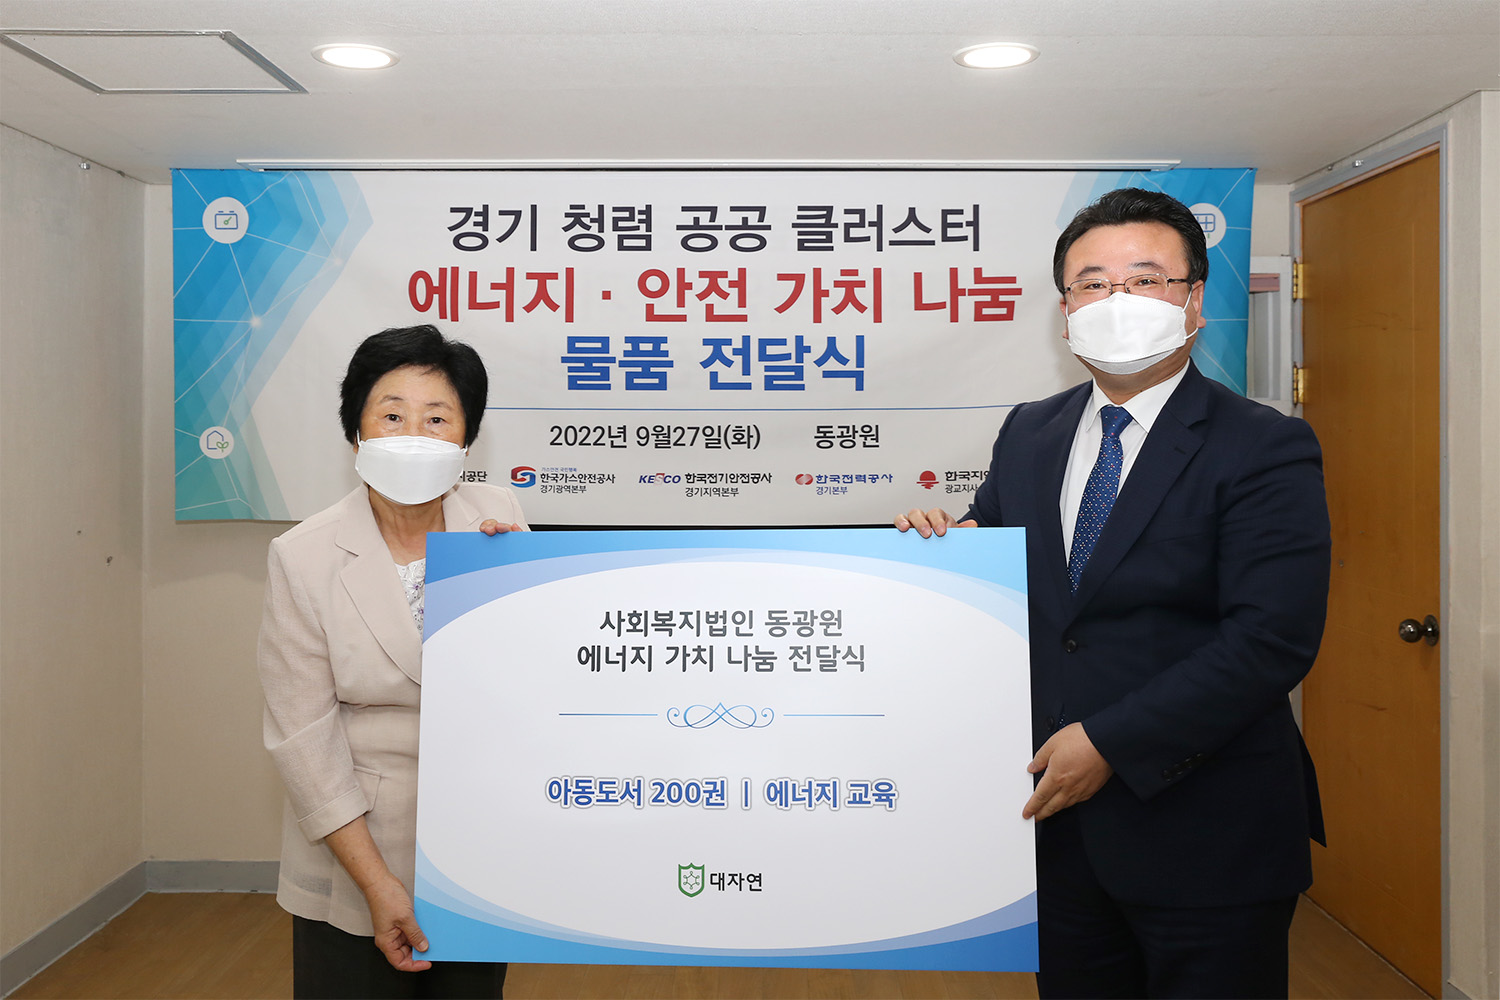 DAEJAYON Promotes Carbon Neutrality in the Local Community b..